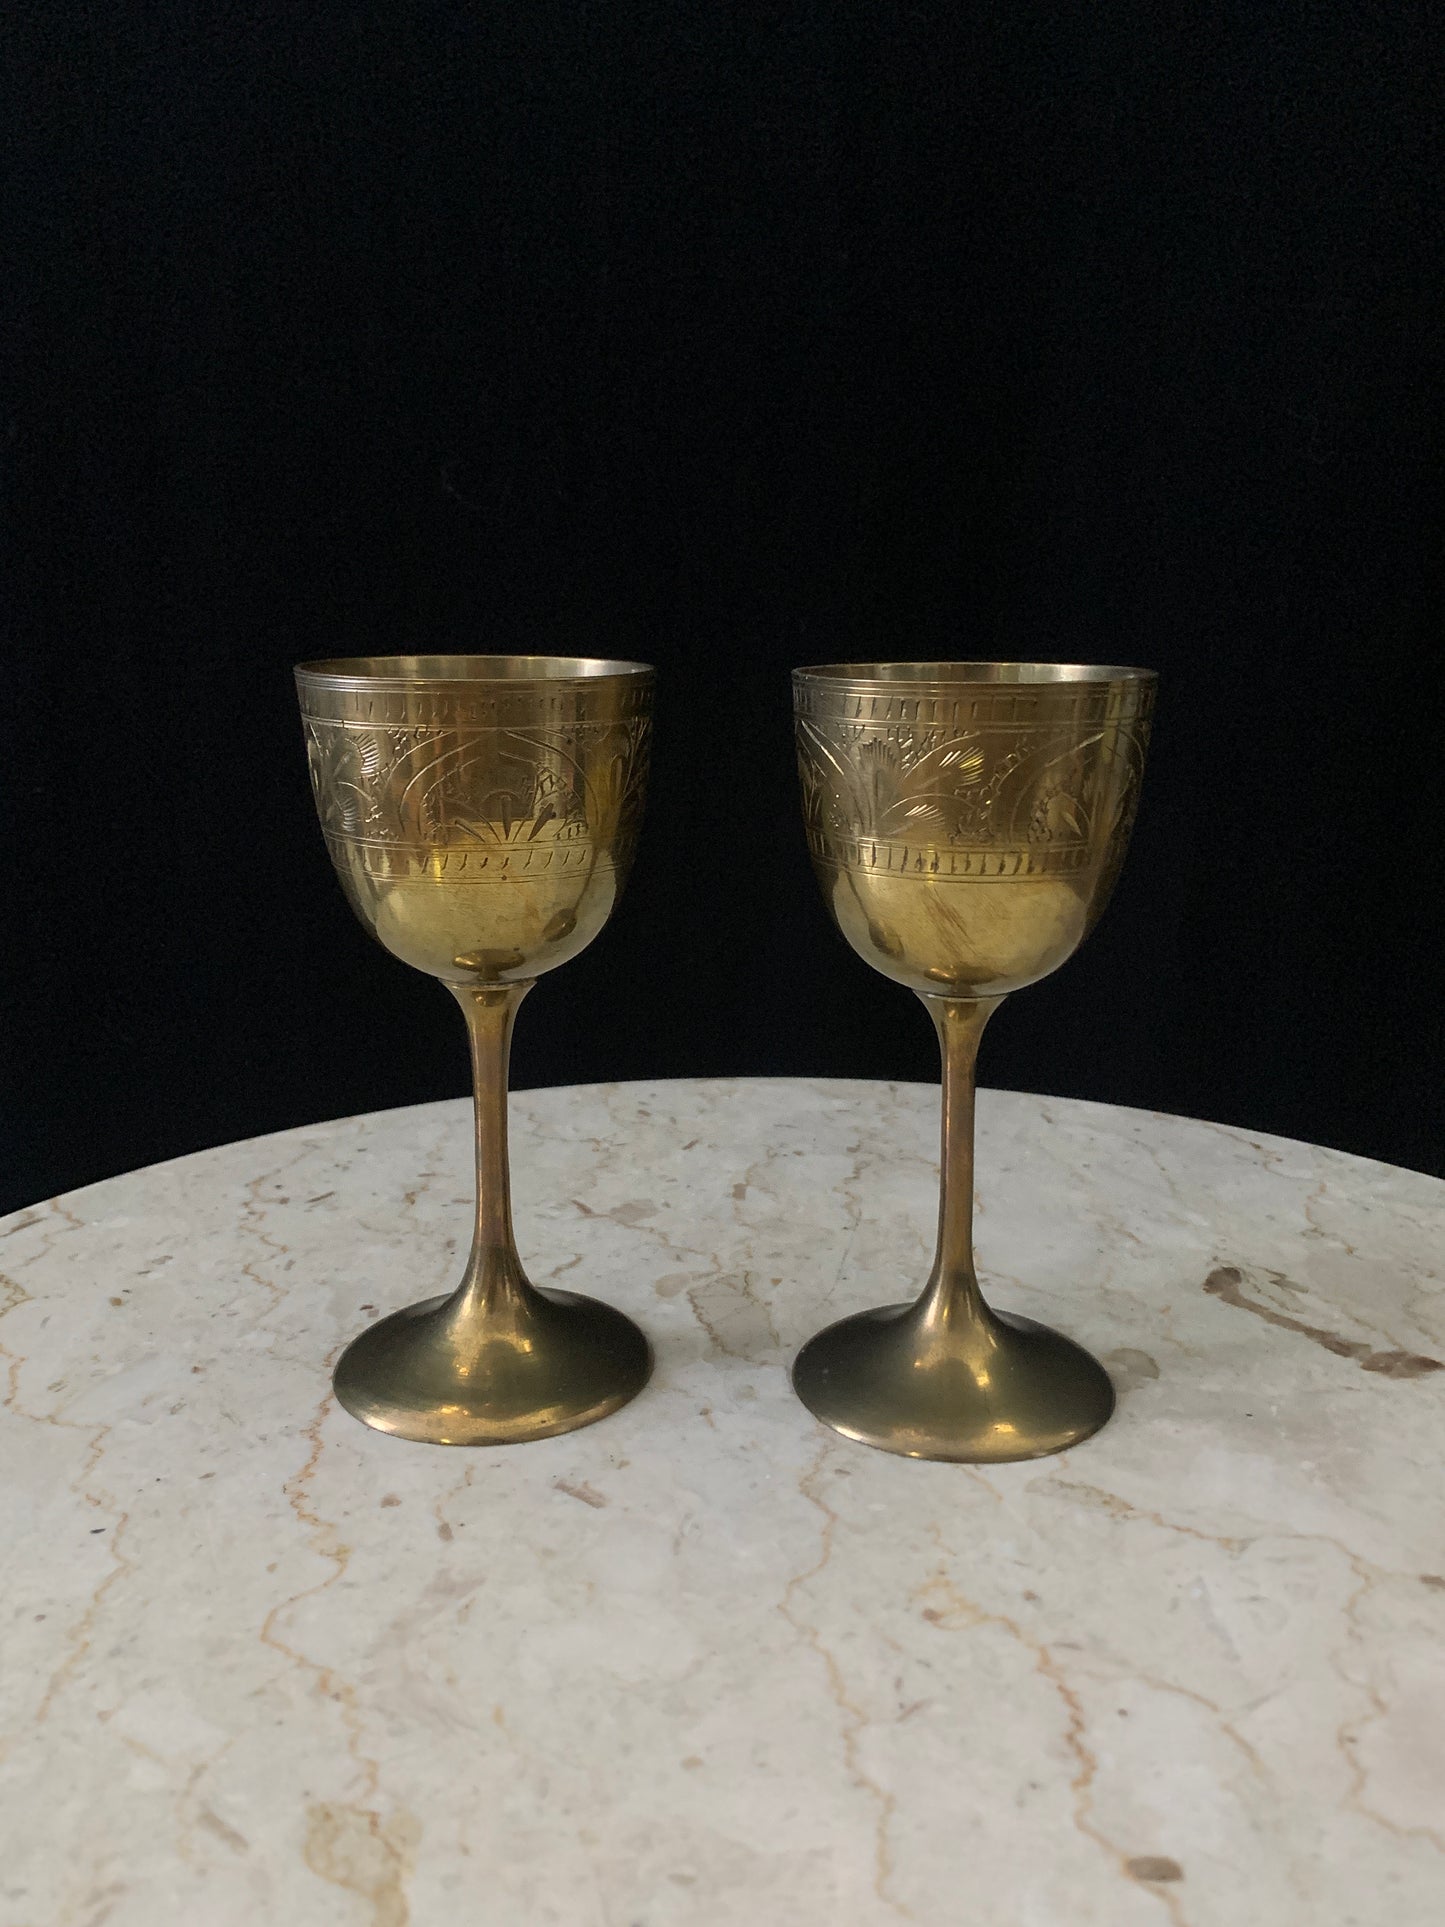 Pair of Brass Wine Goblets with Engraved Floral Design